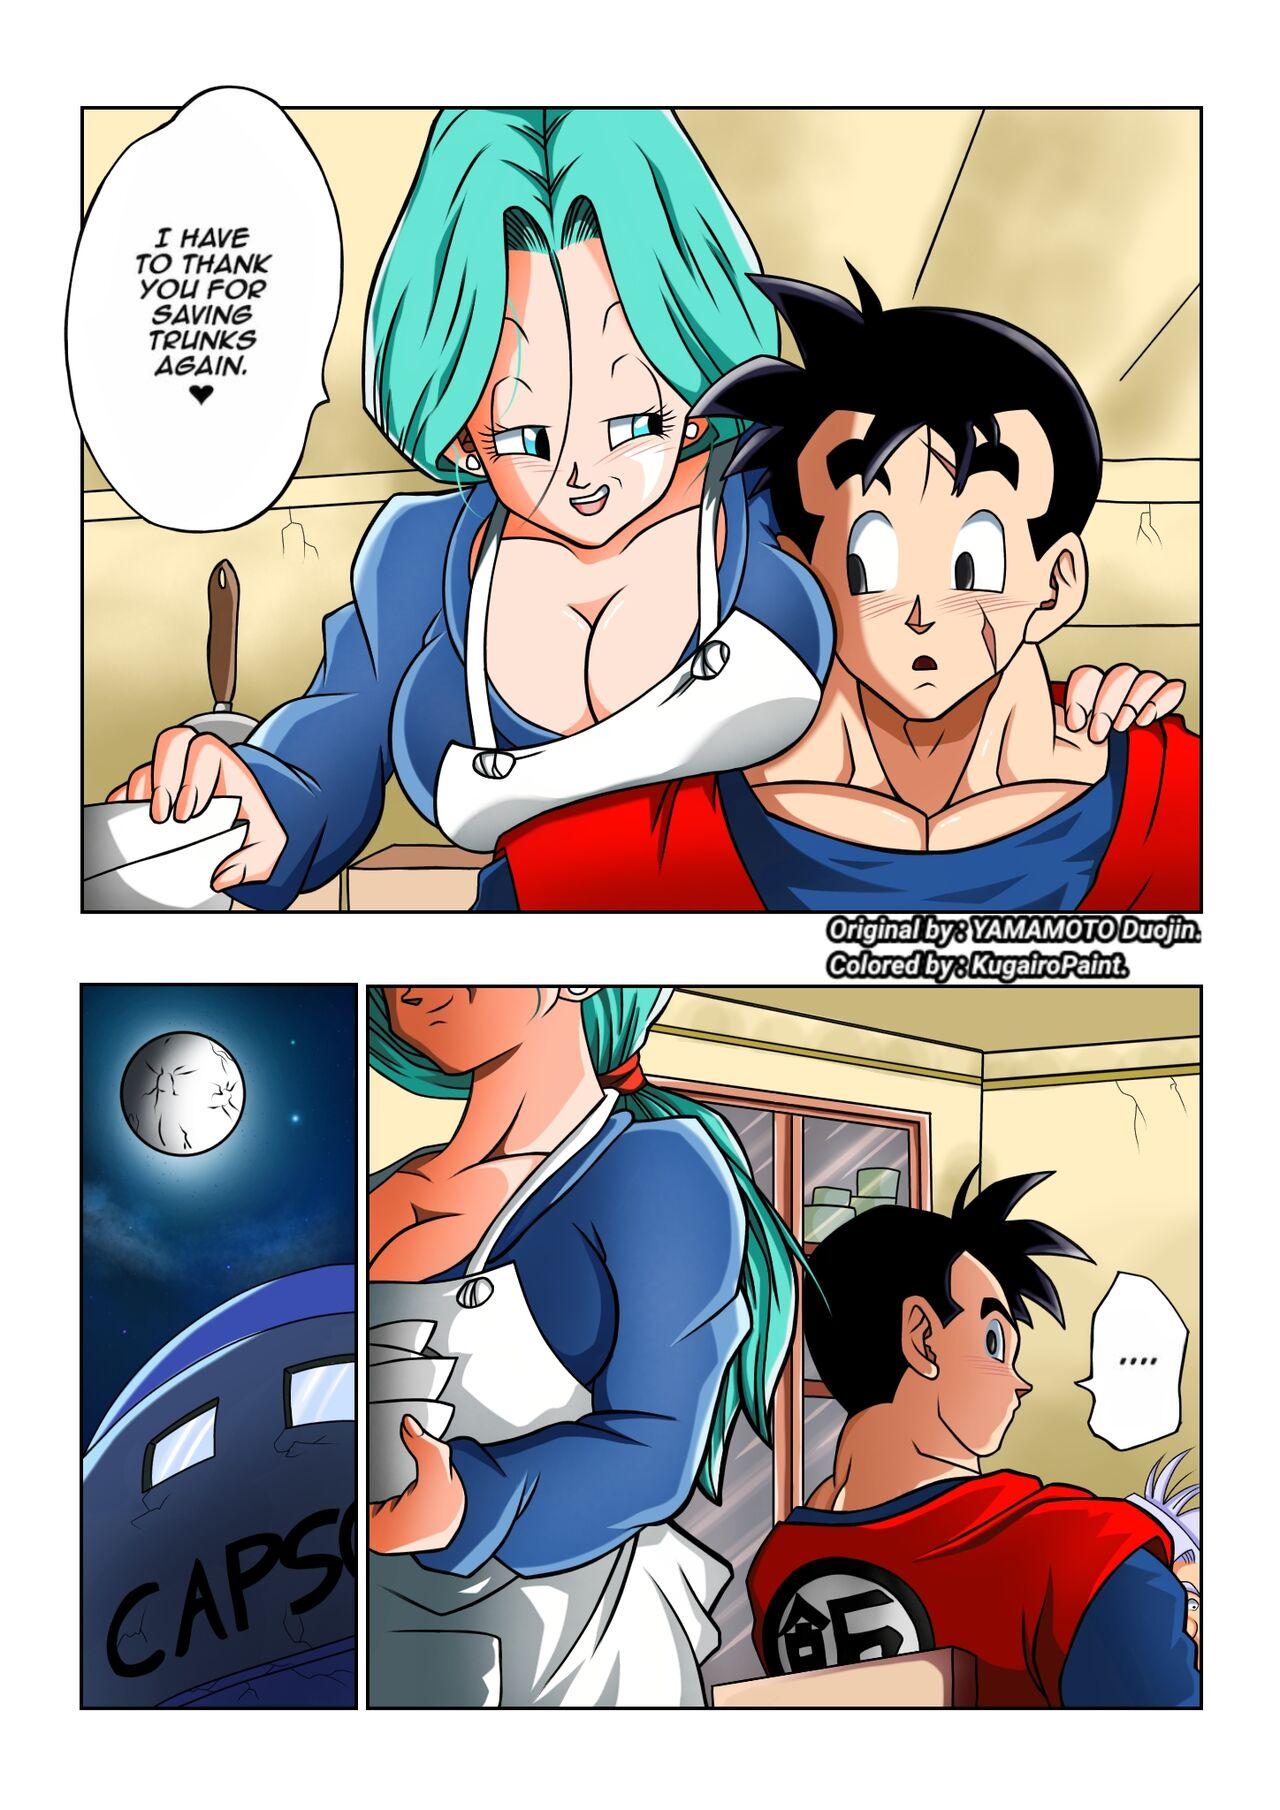 Sexy Girl Lots of Sex in this Future!! - Dragon ball z Vietnamese - Page 4